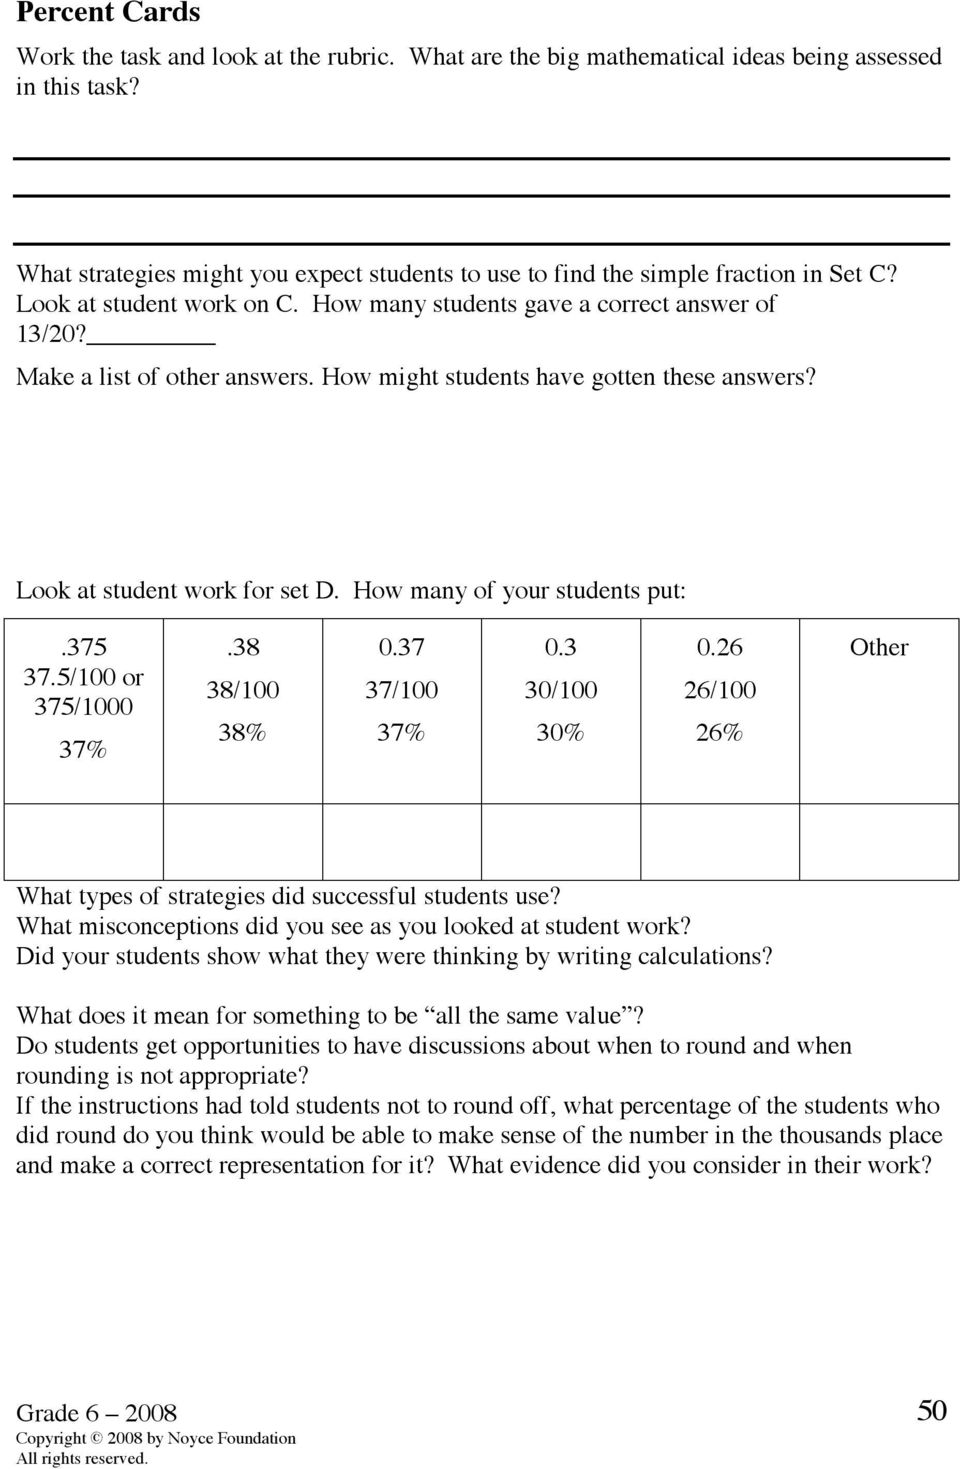 How might students have gotten these answers? Look at student work for set D. How many of your students put:.375 37.5/100 or 375/1000 37%.38 38/100 38% 0.37 37/100 37% 0.3 30/100 30% 0.